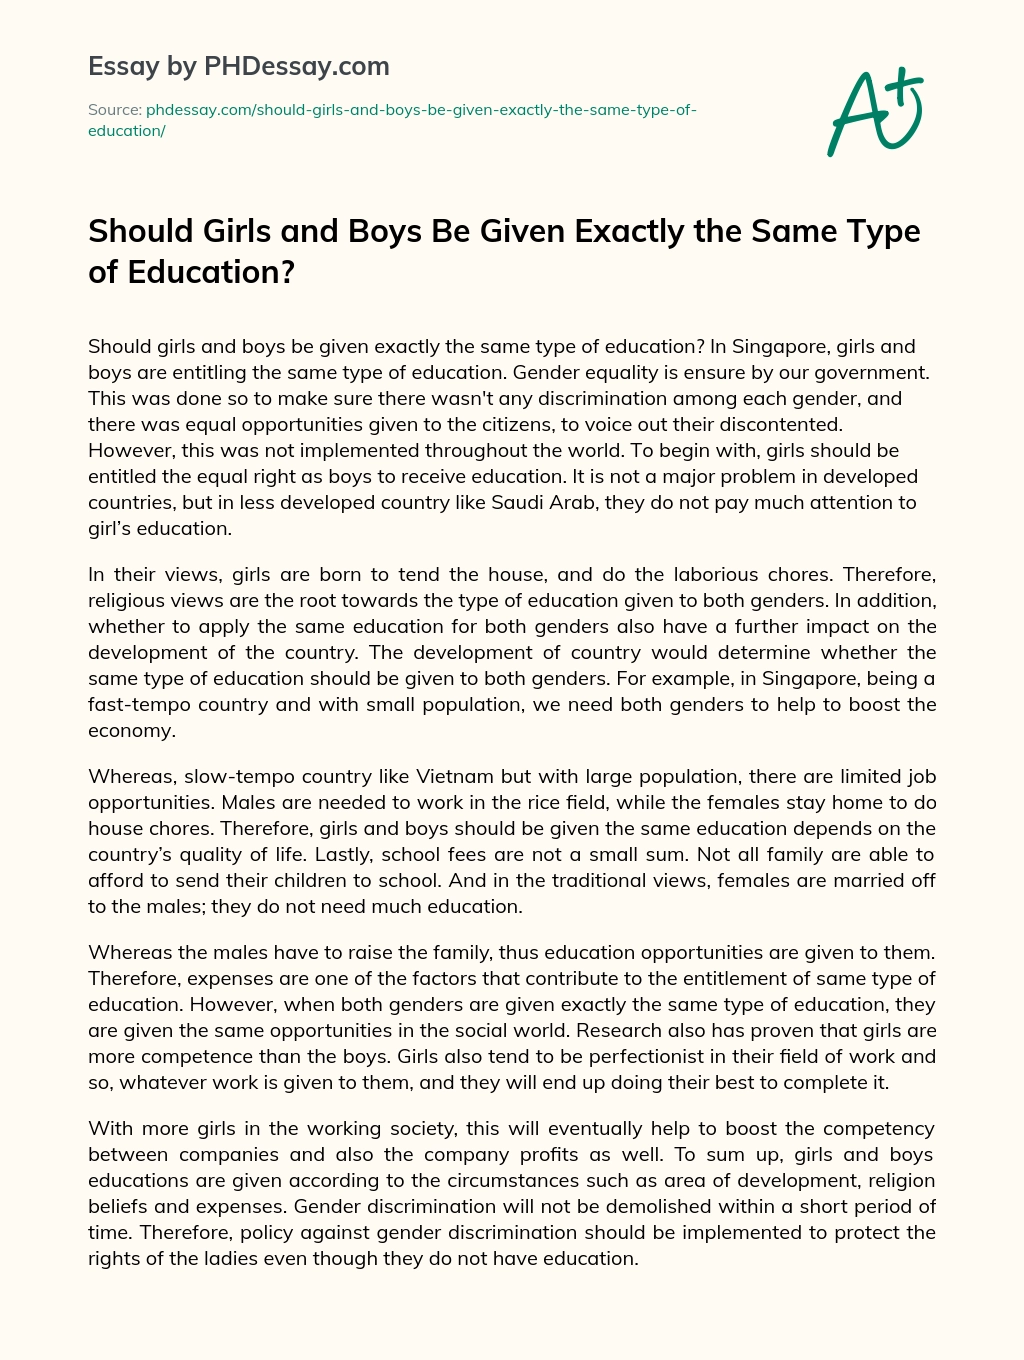 Should Girls and Boys Be Given Exactly the Same Type of Education? essay